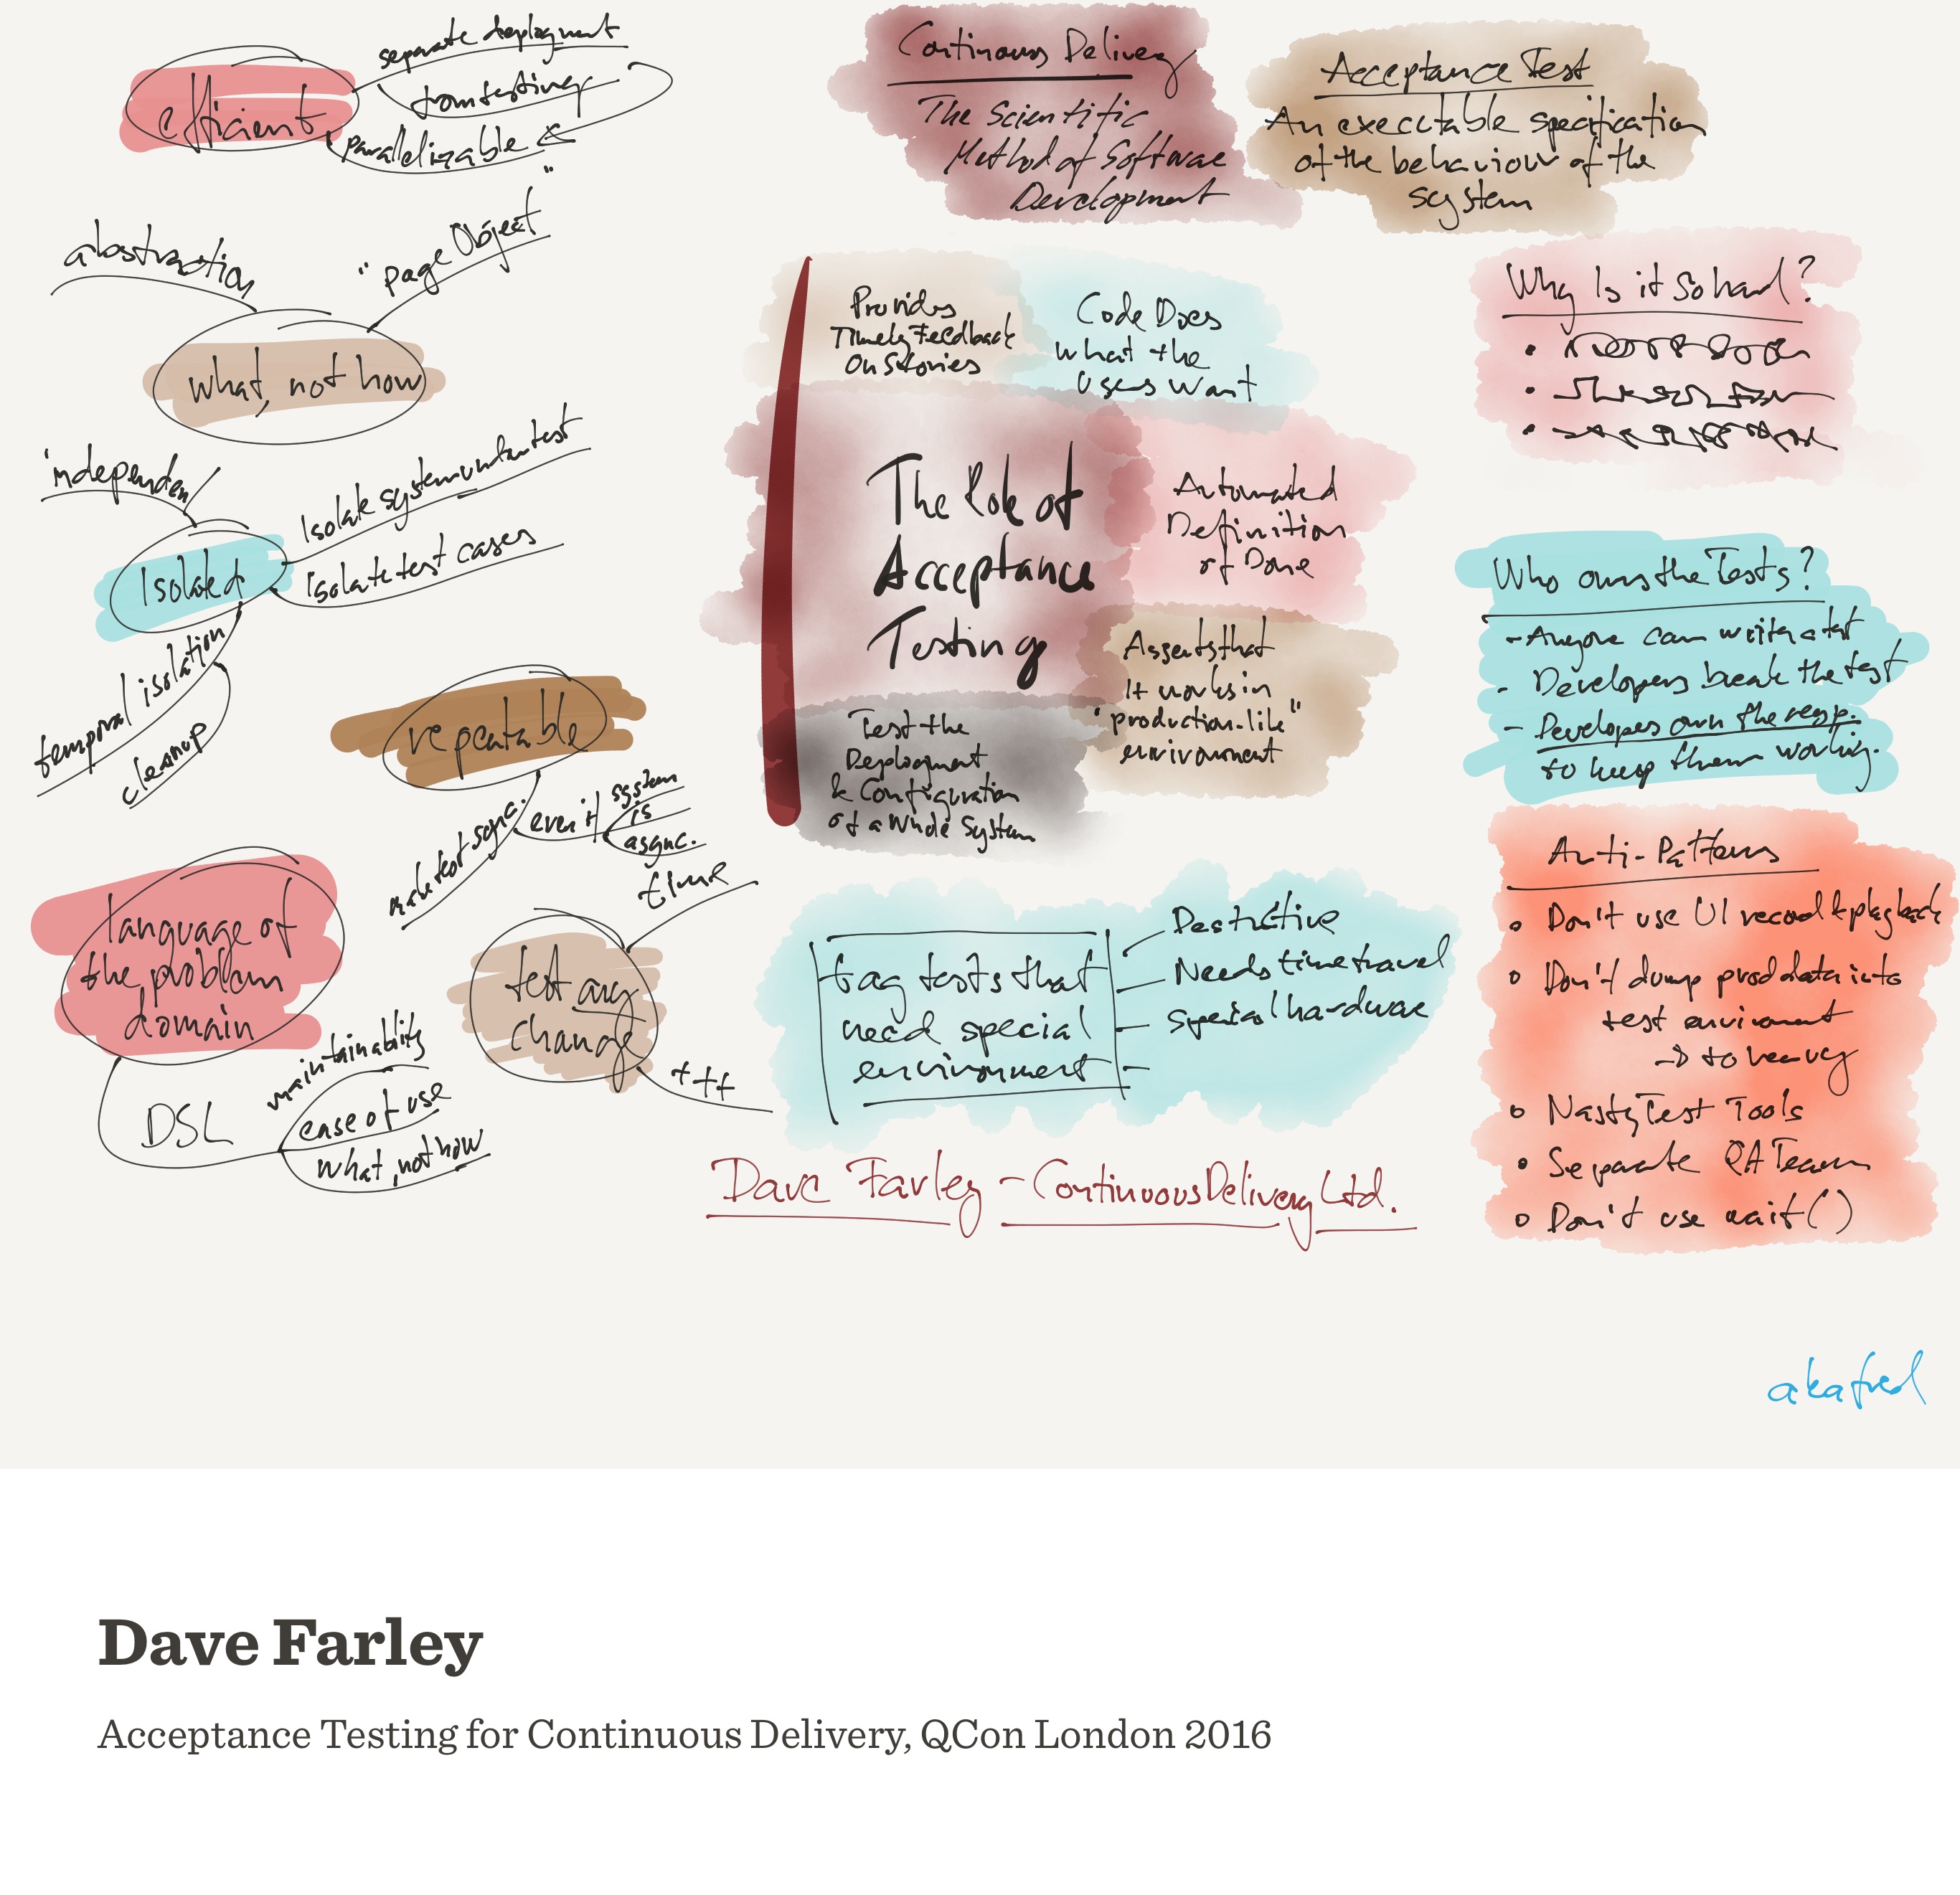 Notes from Acceptance Testing for Continuous Delivery (Dave Farley)